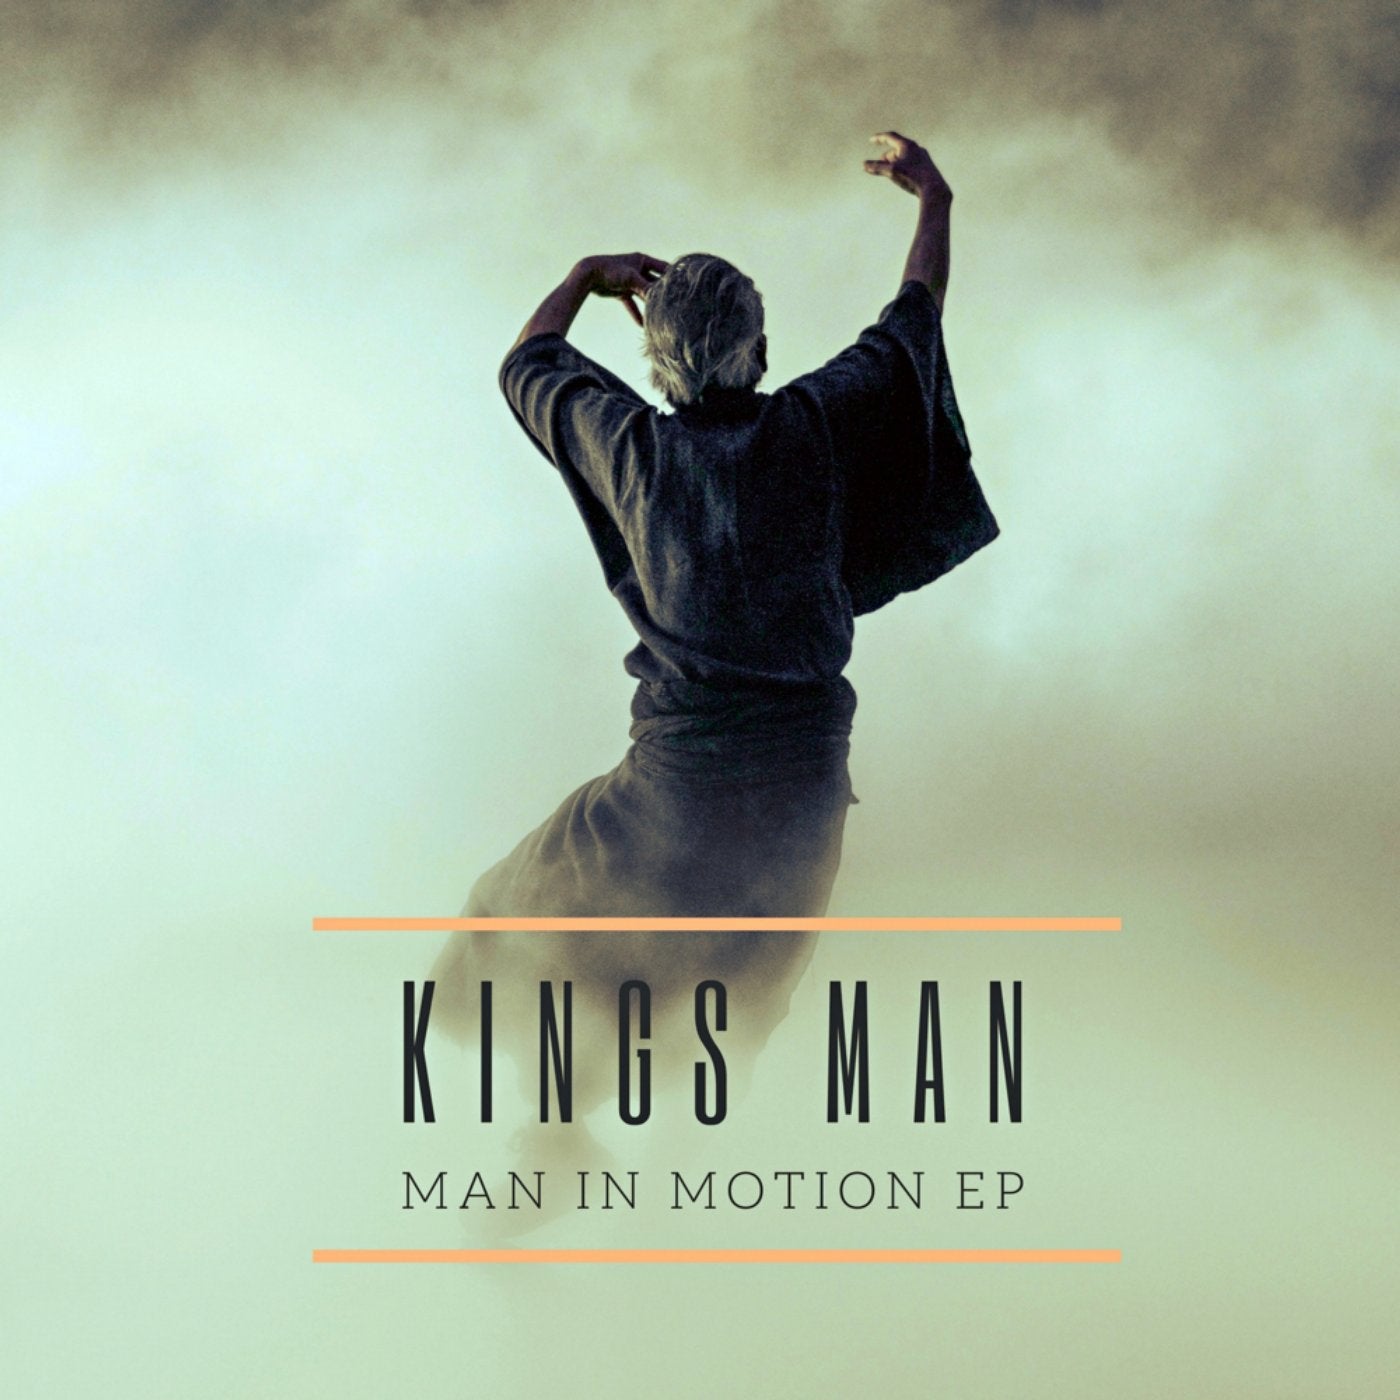 Man In Motion Ep